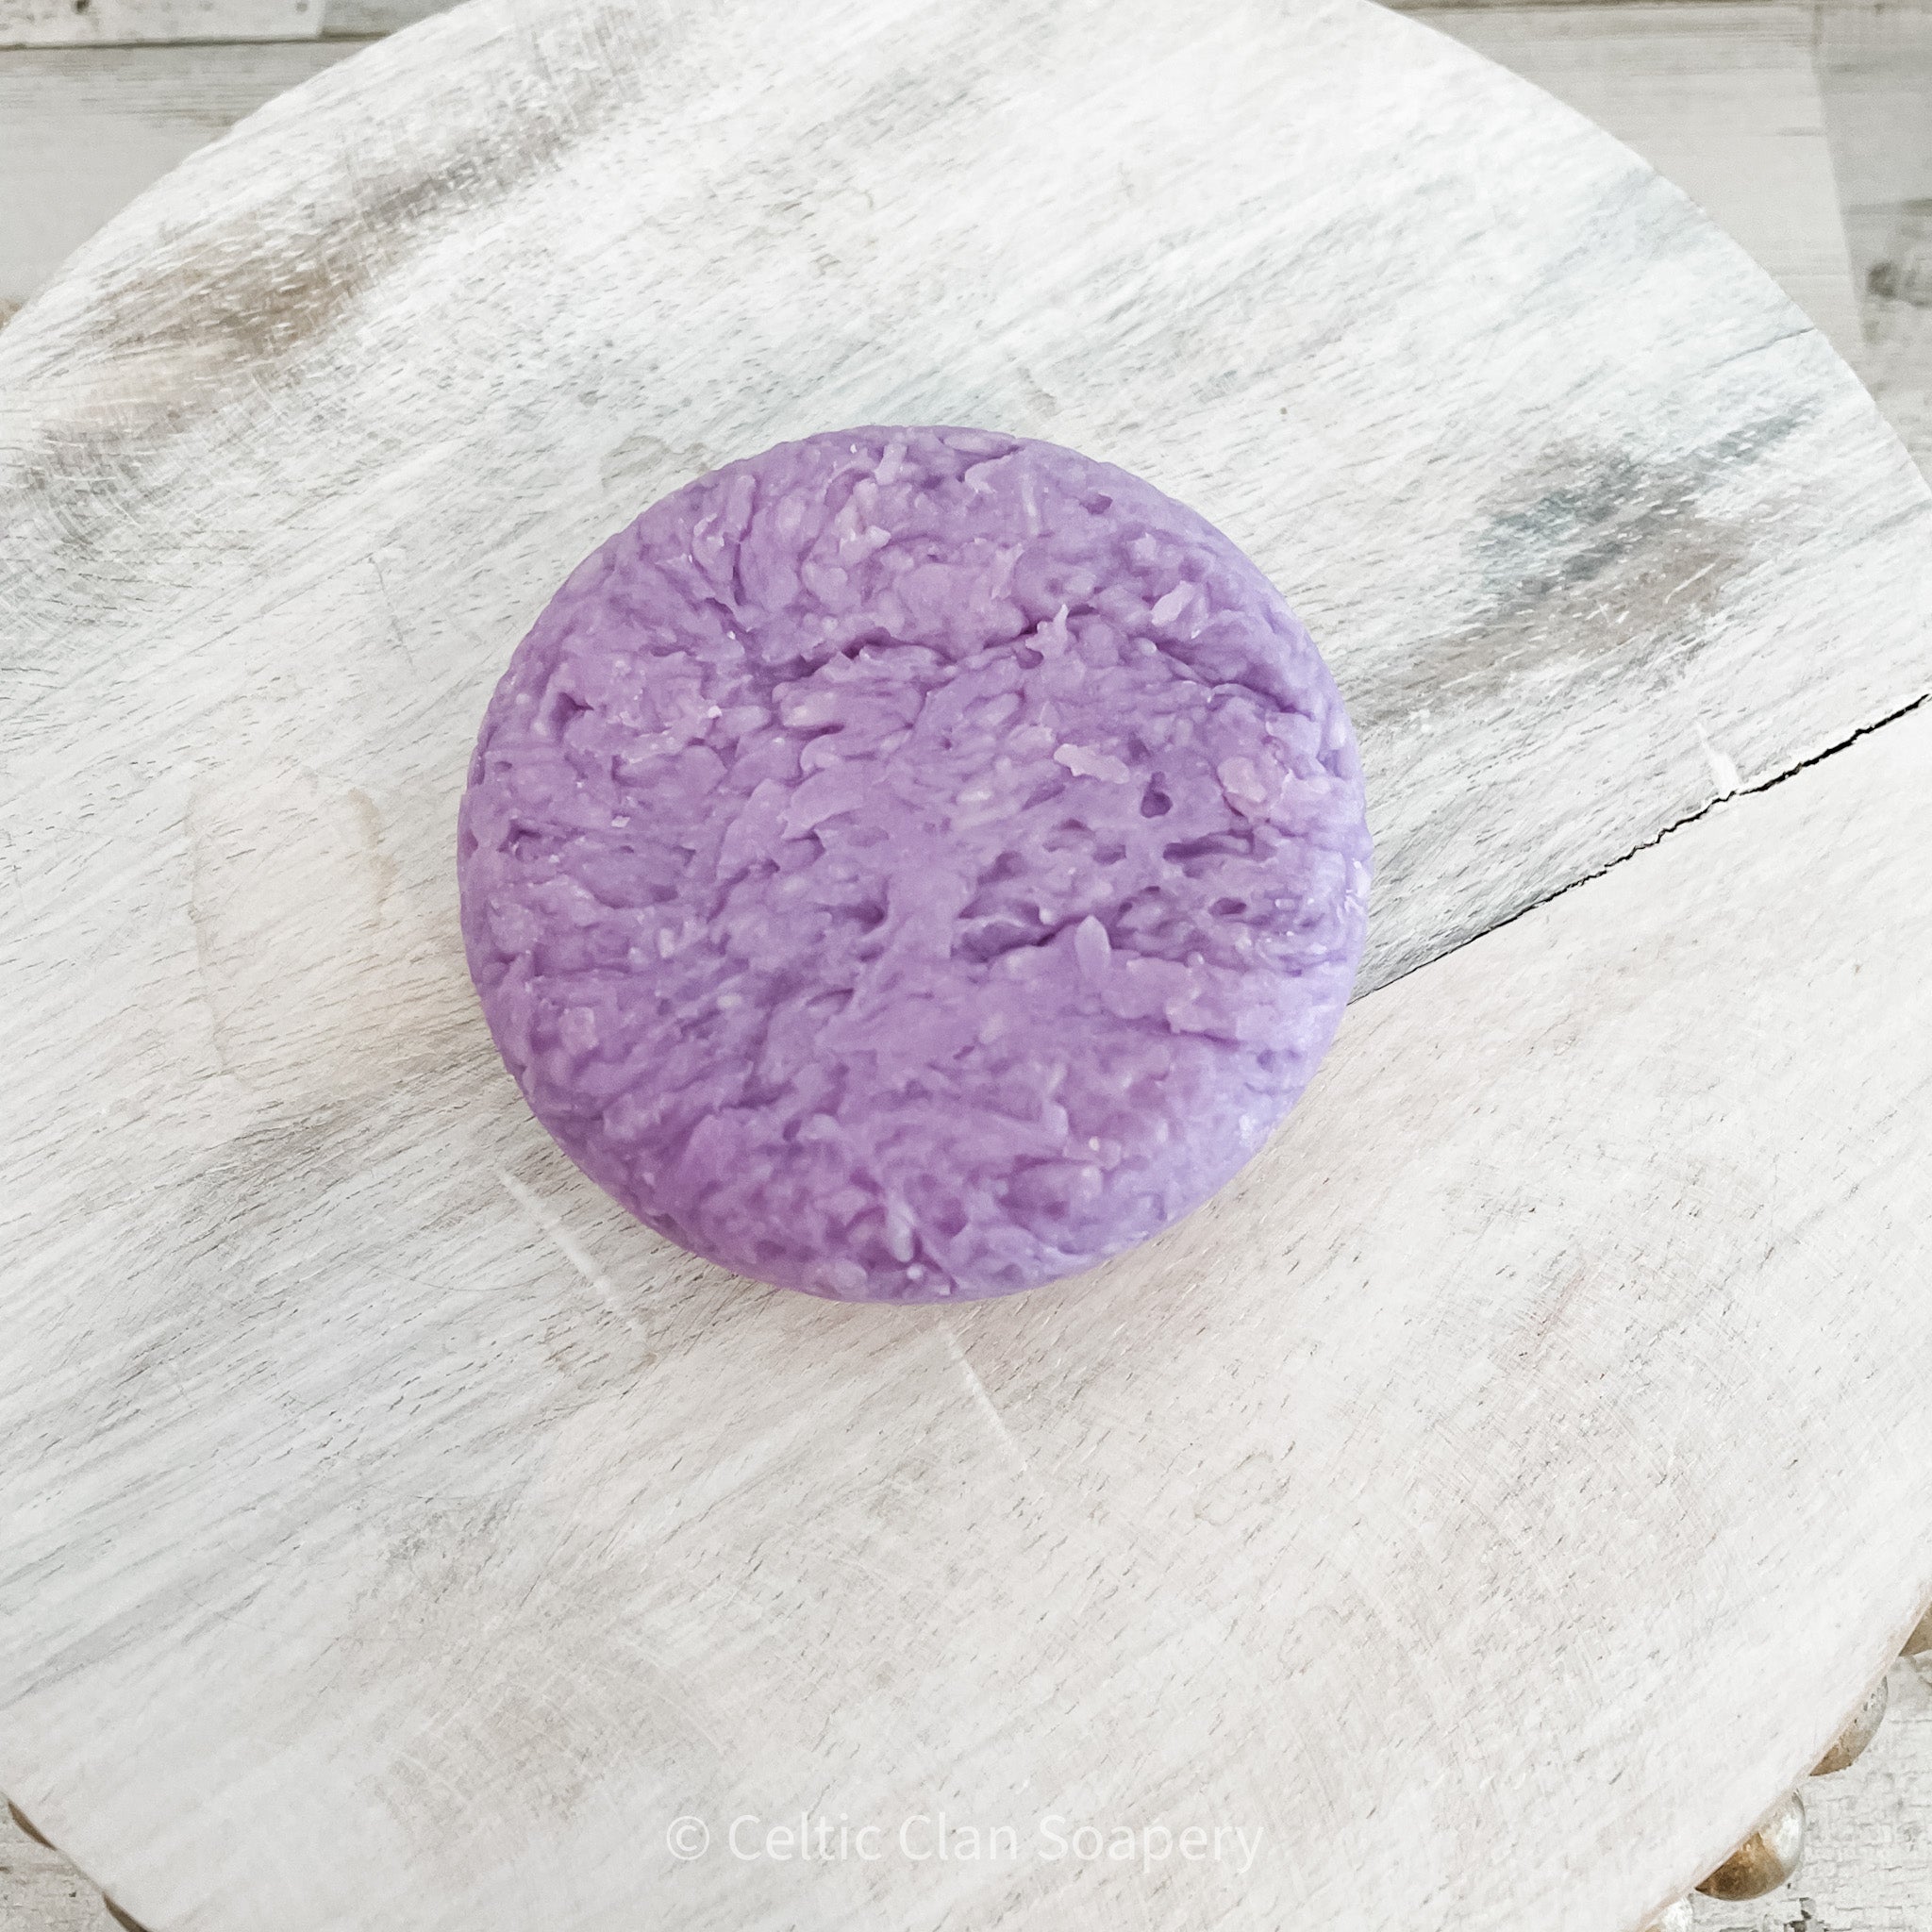 Celtic Clan Soapery sulfate free shampoo bar lavender essential oil